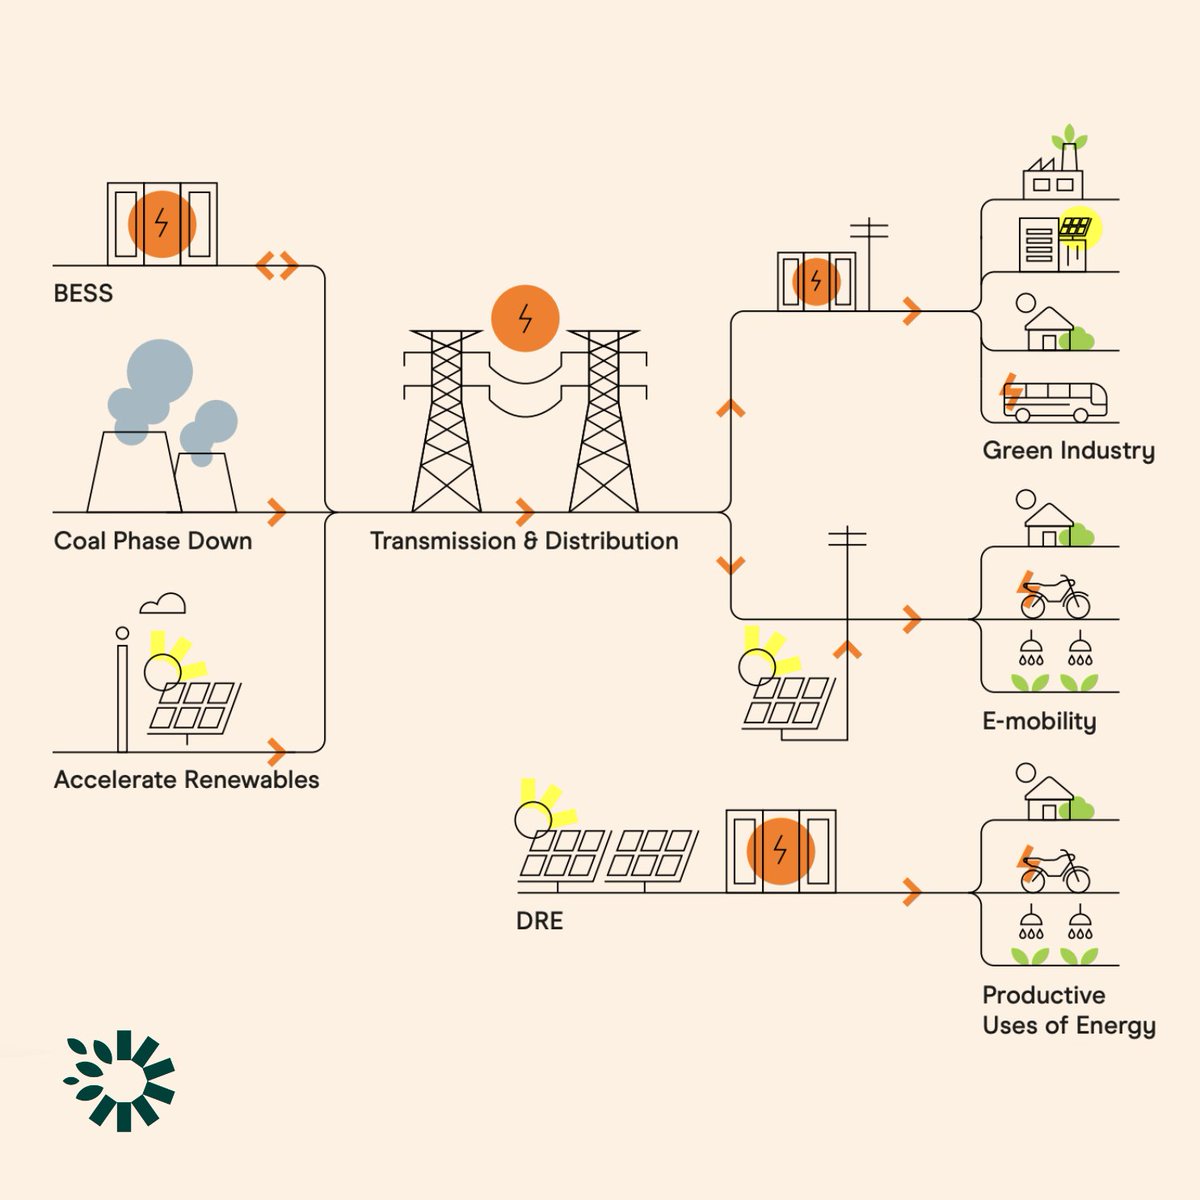 Want the spark notes version of how our solutions work? Check our graphic below or head to energyalliance.org for the full scoop. 

🔌We're all about connecting as many people as possible to clean electricity. 

Which one do you want to know more about?

#LetsChangeEnergy☀️